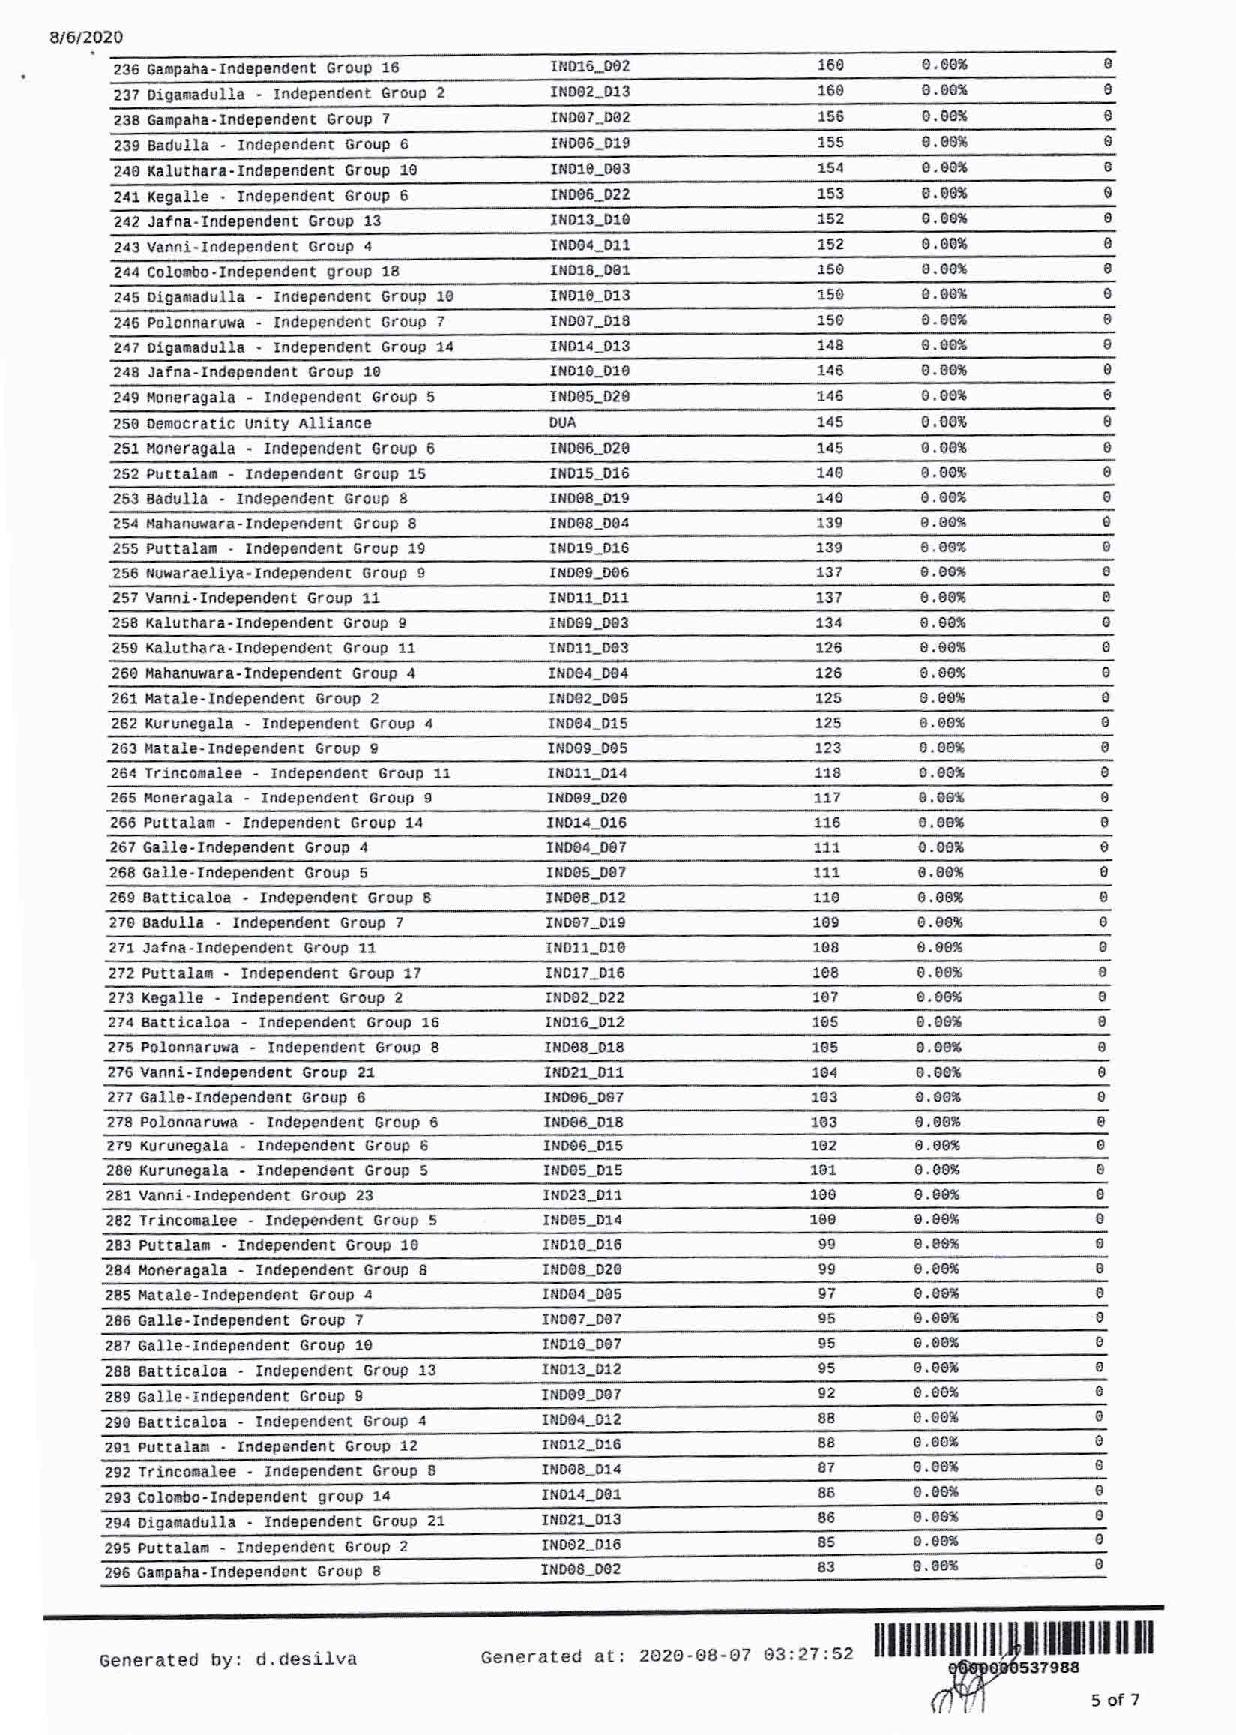 National List page 005